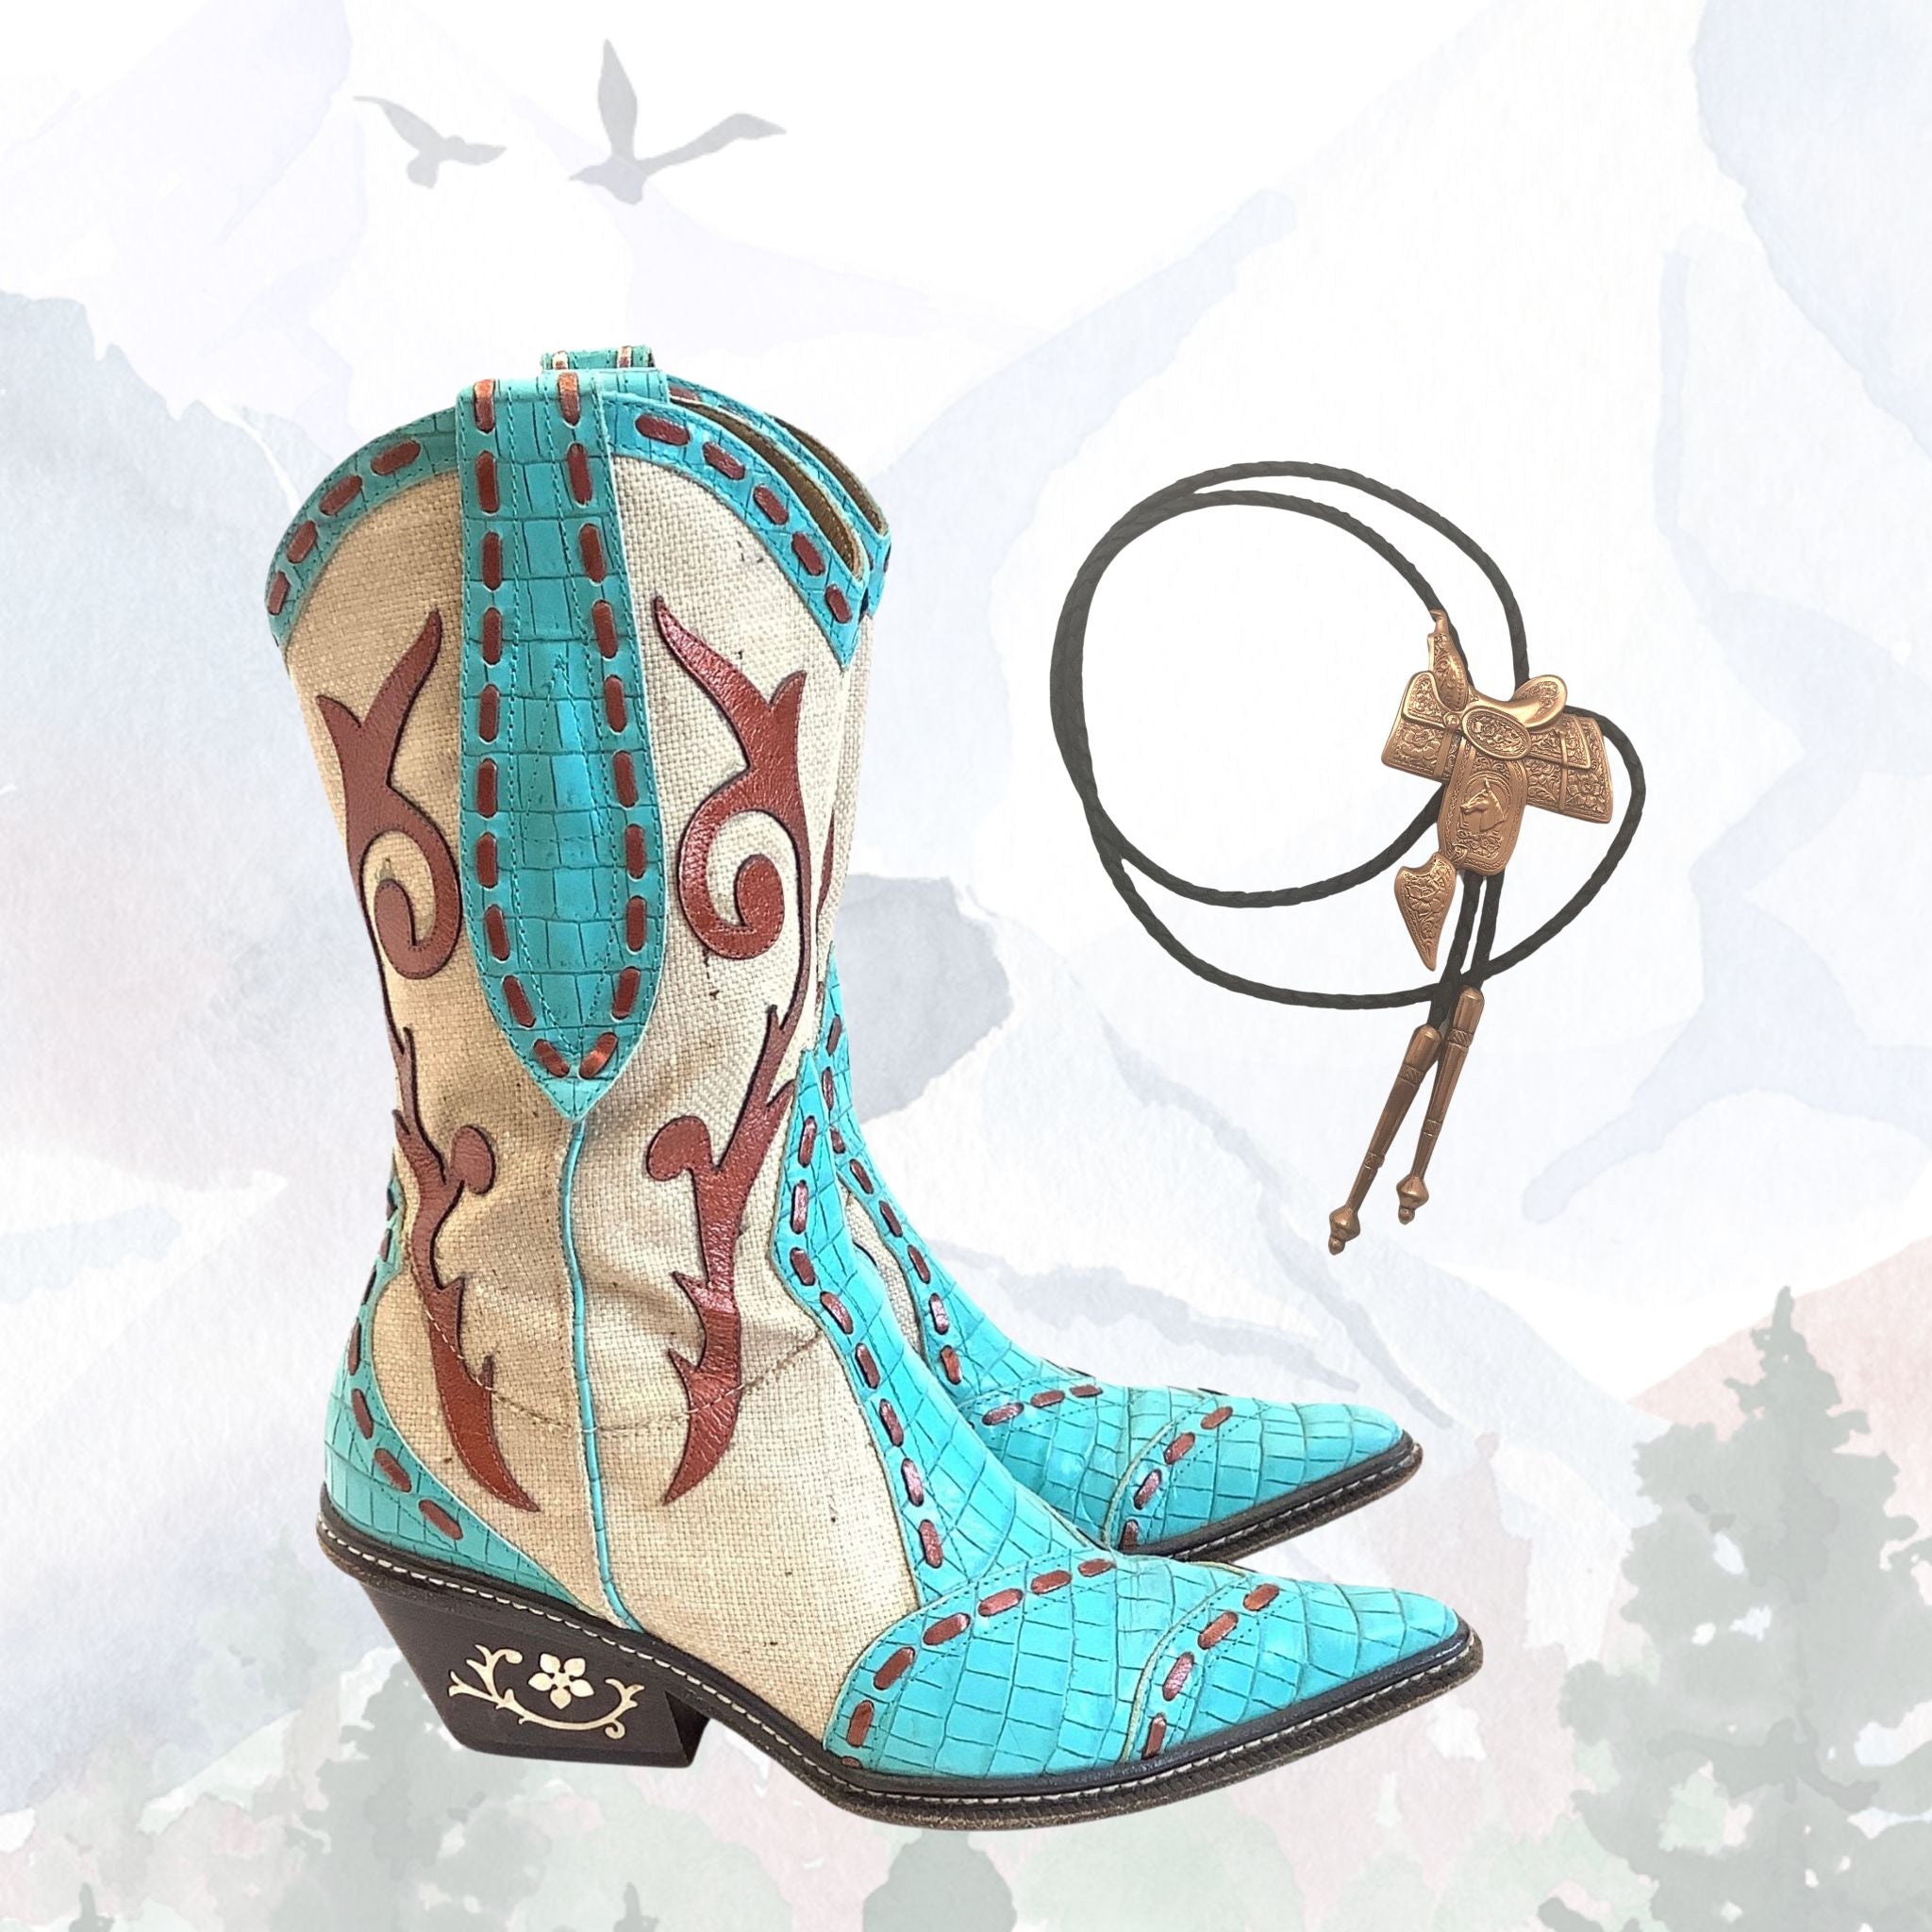 Embellished Women's Cowboy Boots and Western Bolo Tie